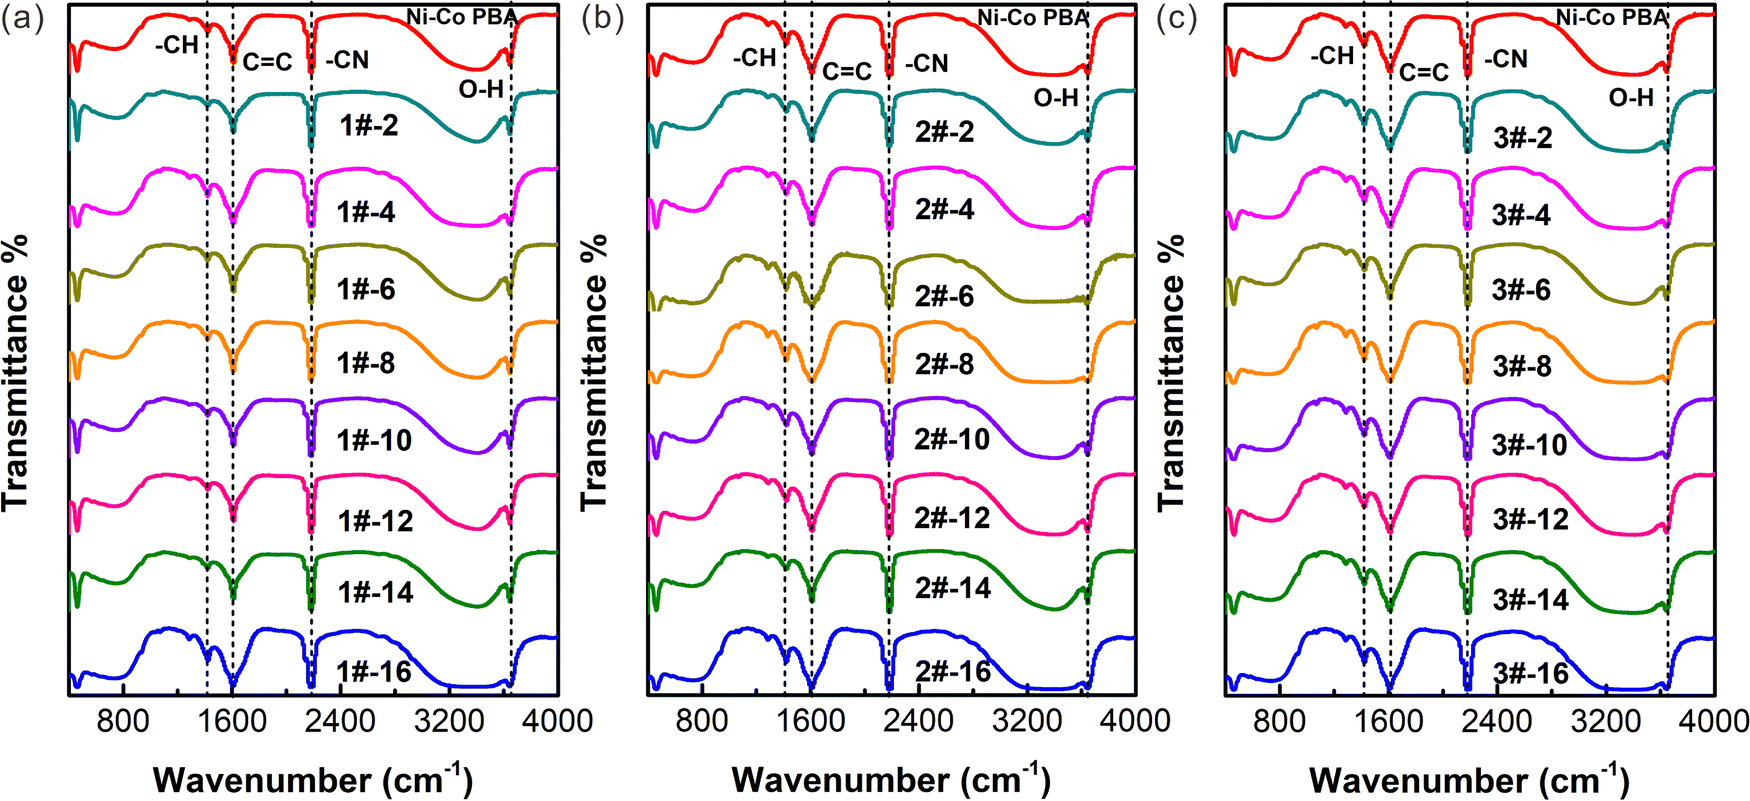 Fig. S5. IR spectrum of 1-Co. Given are the values for the CN